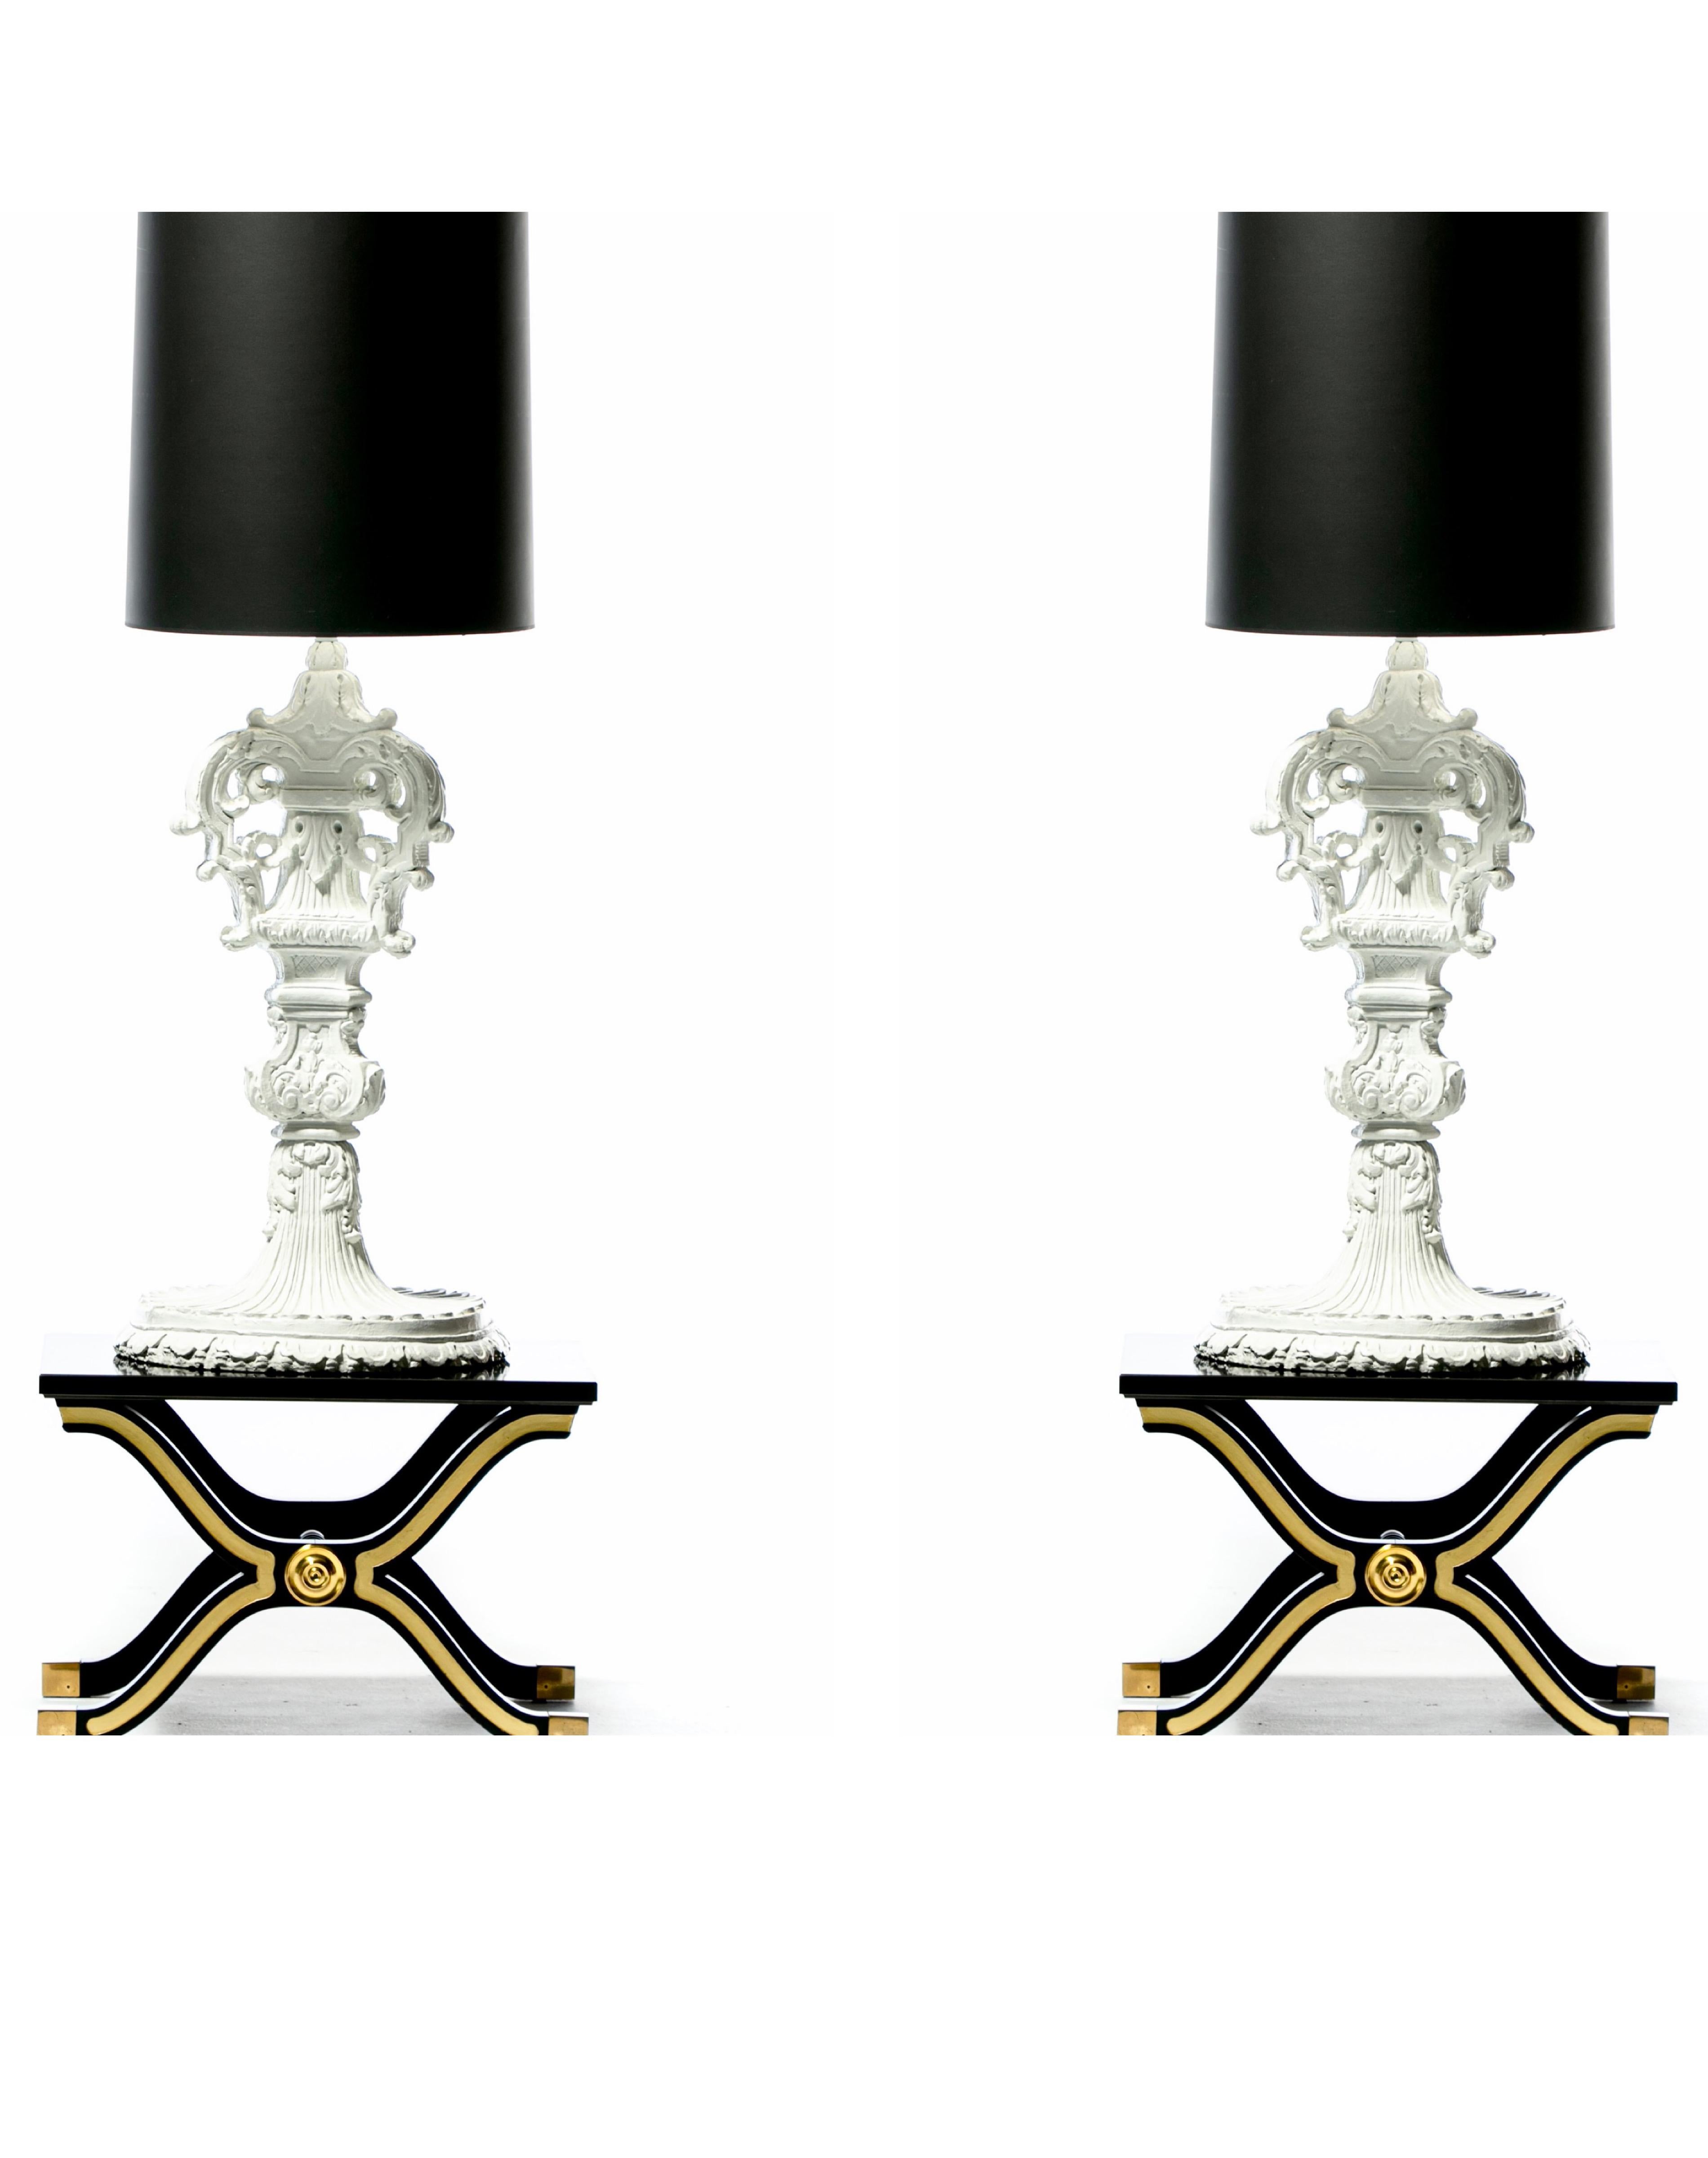 This pair of Marge Carsons Hollywood Regency Baroque lamps have that Dorothy Draper Greenbrier Hotel Grand Lobby WOW factor. To say these plaster lamps are elegant seems an offensive understatement. Crowns of staggered sloping plumes rest atop a